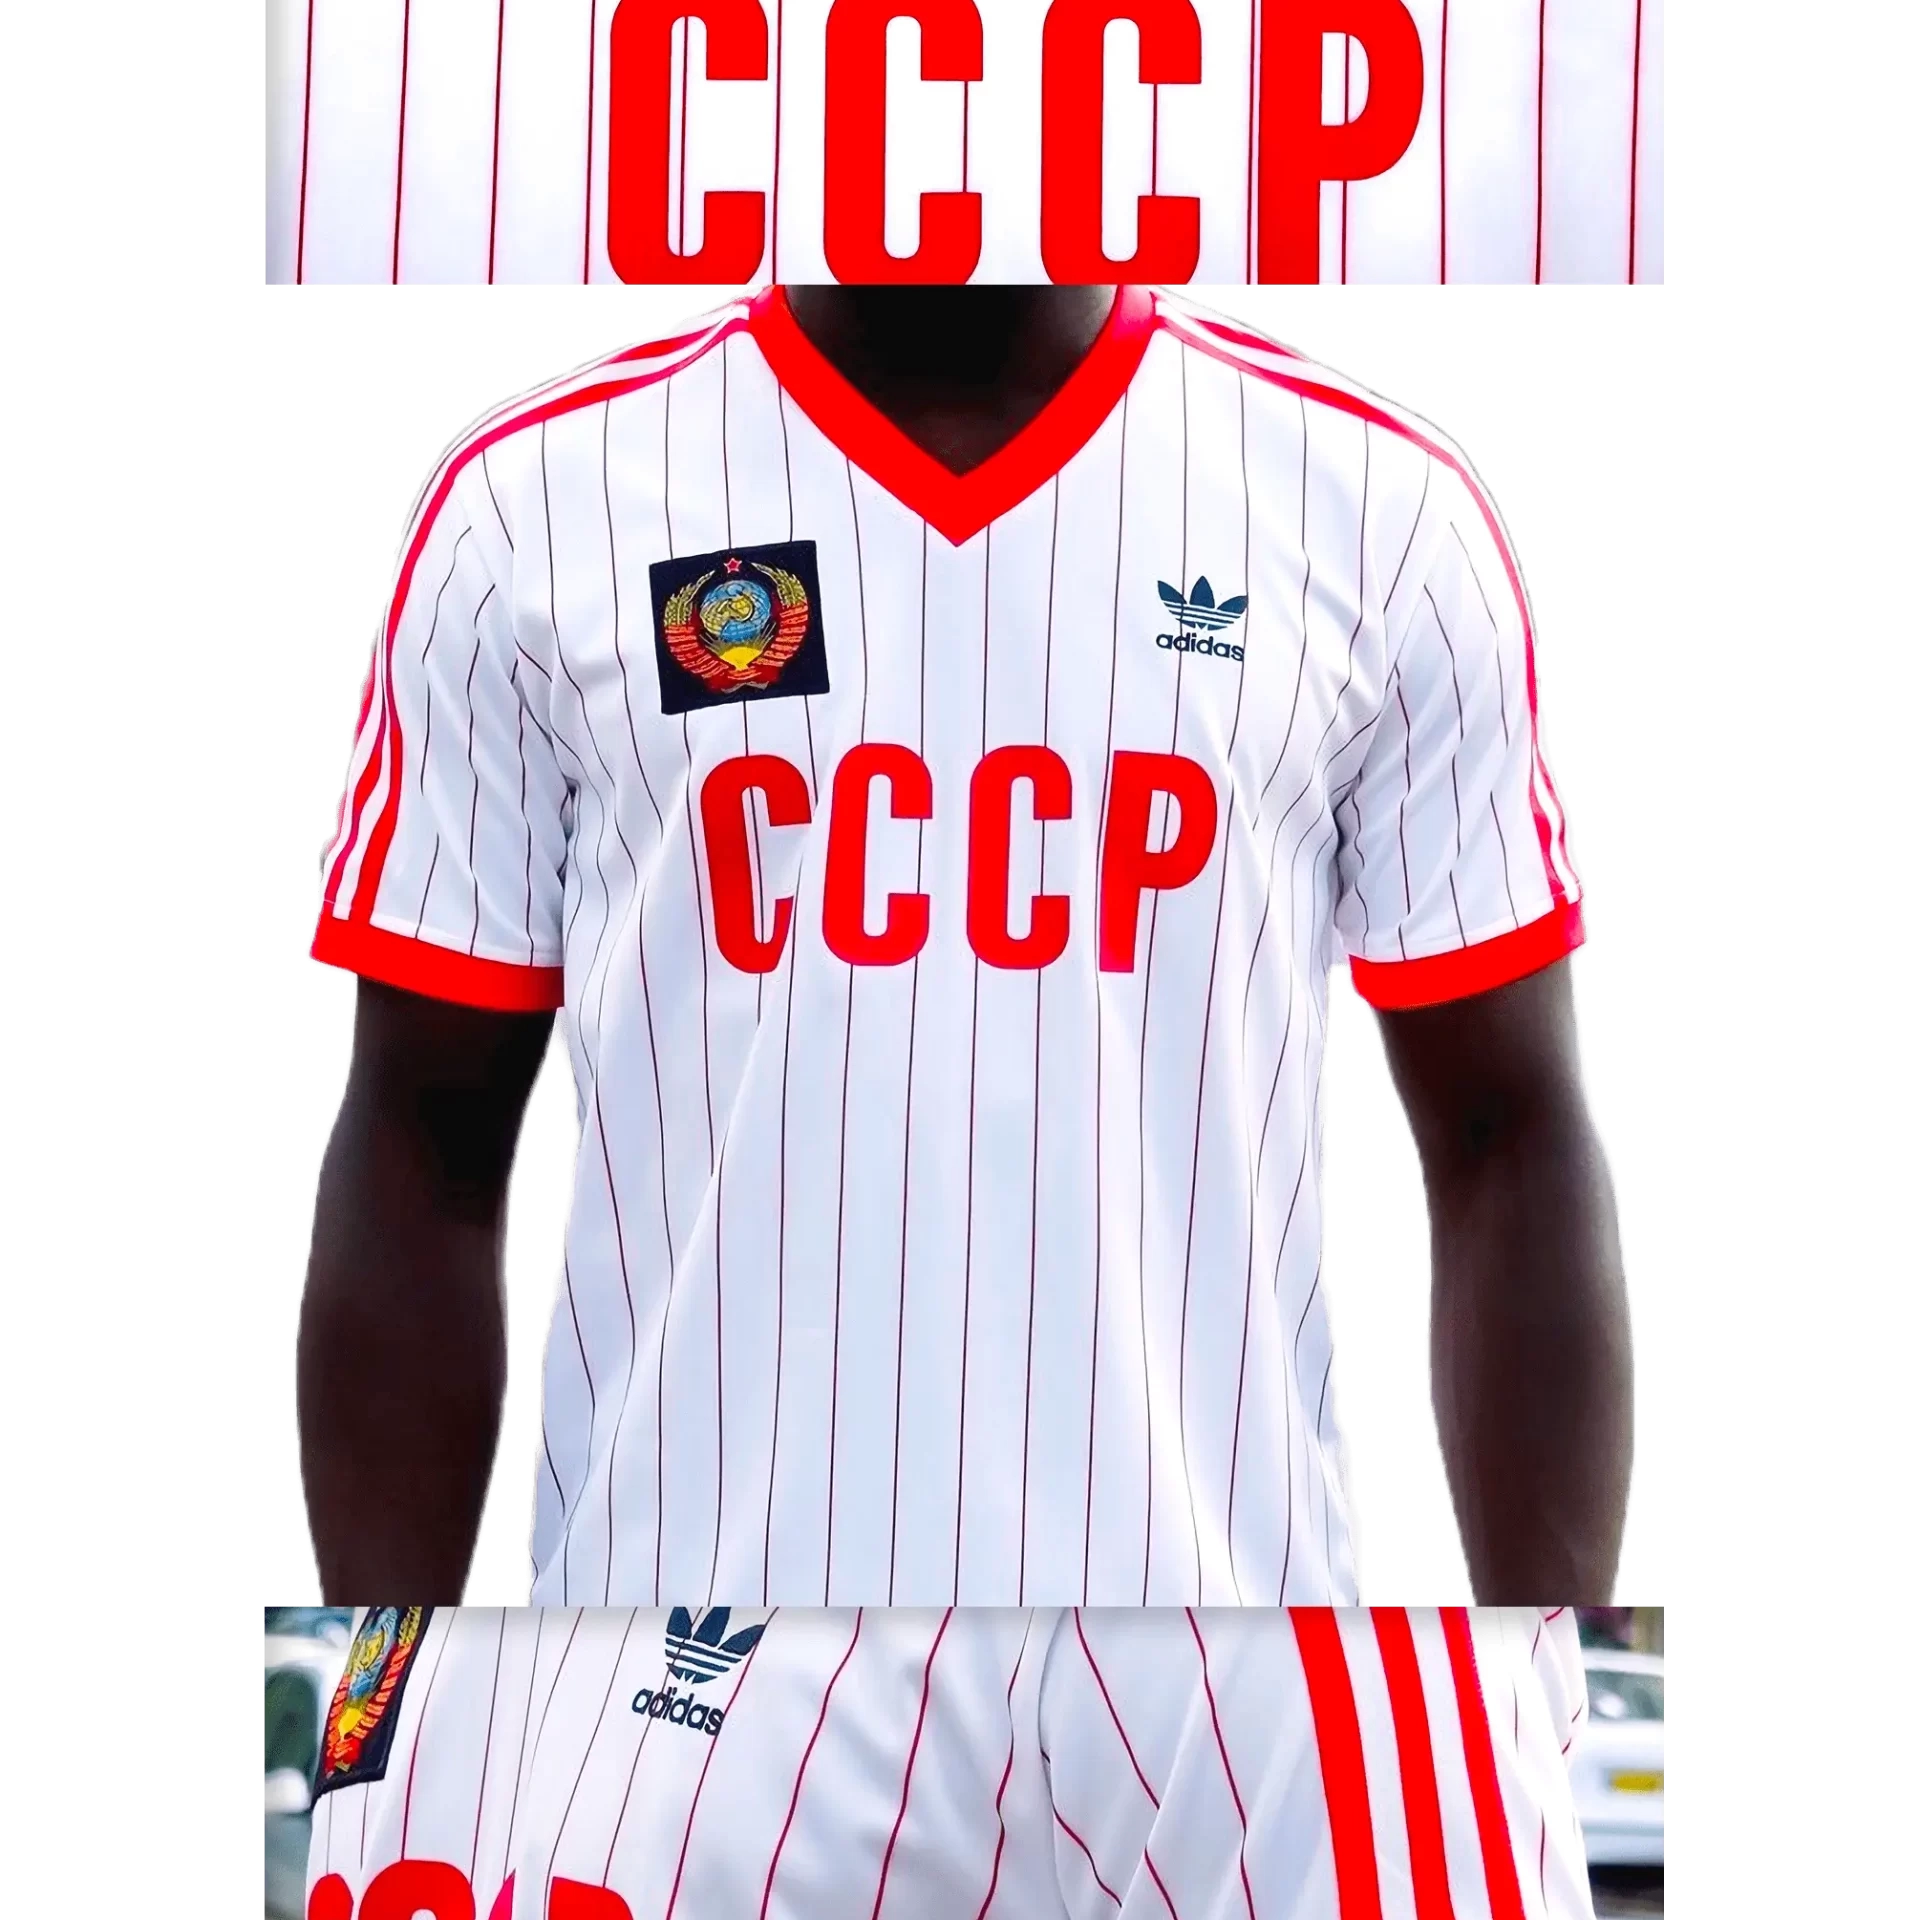 Men's 2004 Soviet CCCP '82 Jersey by Adidas Originals: Strong (EnLawded.com file #lmchk65739ip2y123824kg9st)